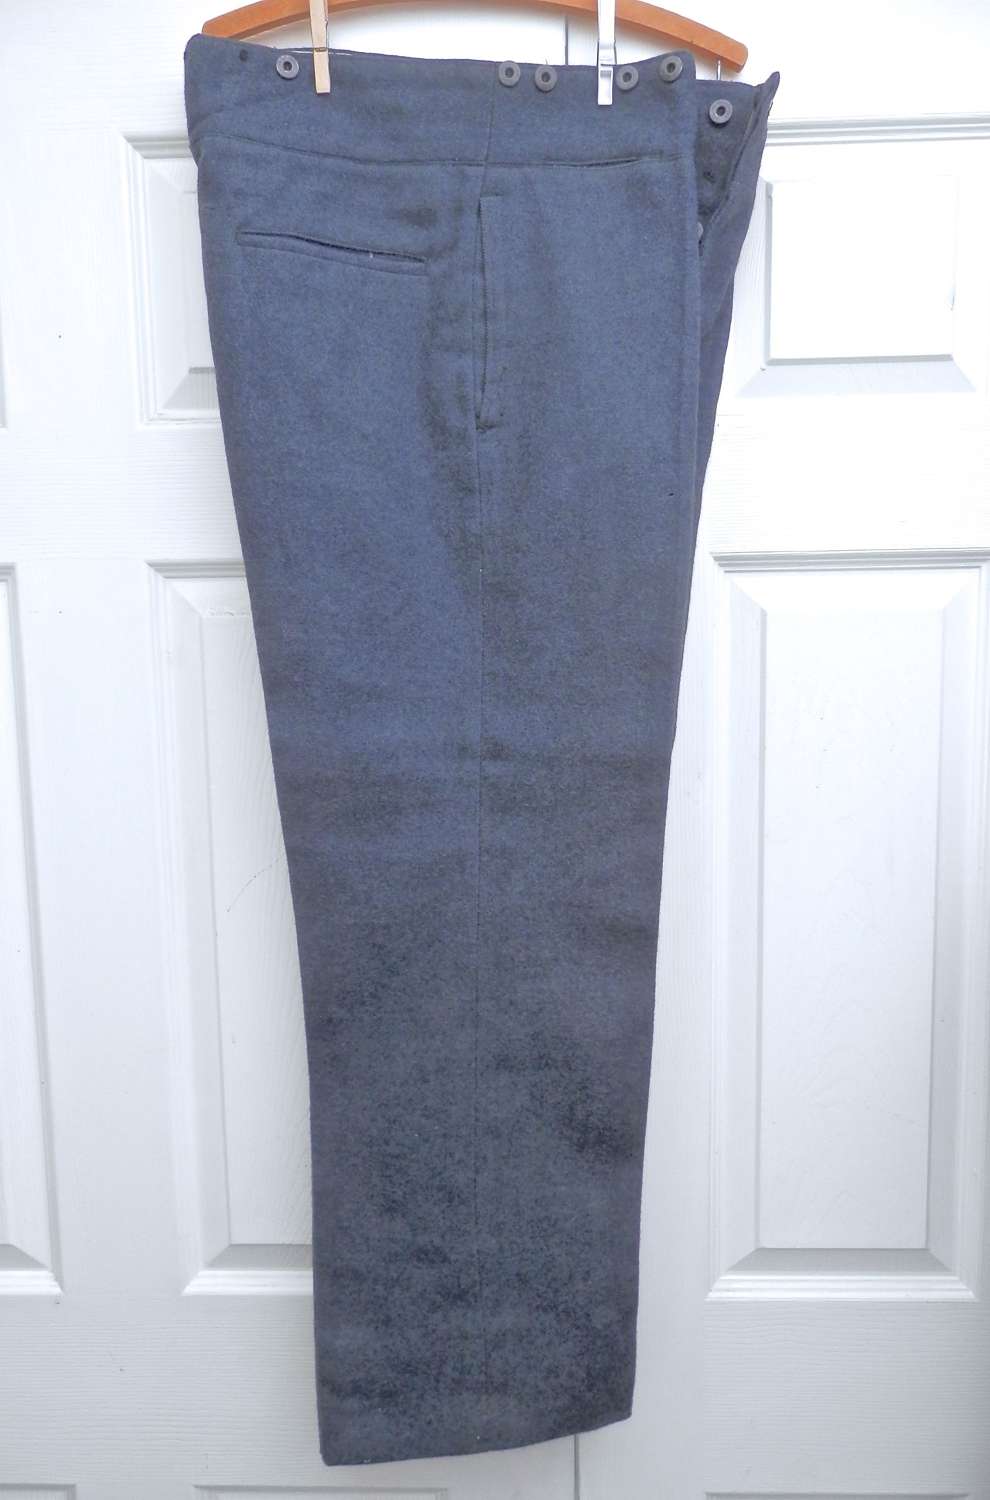 RAF other rank service dress trousers